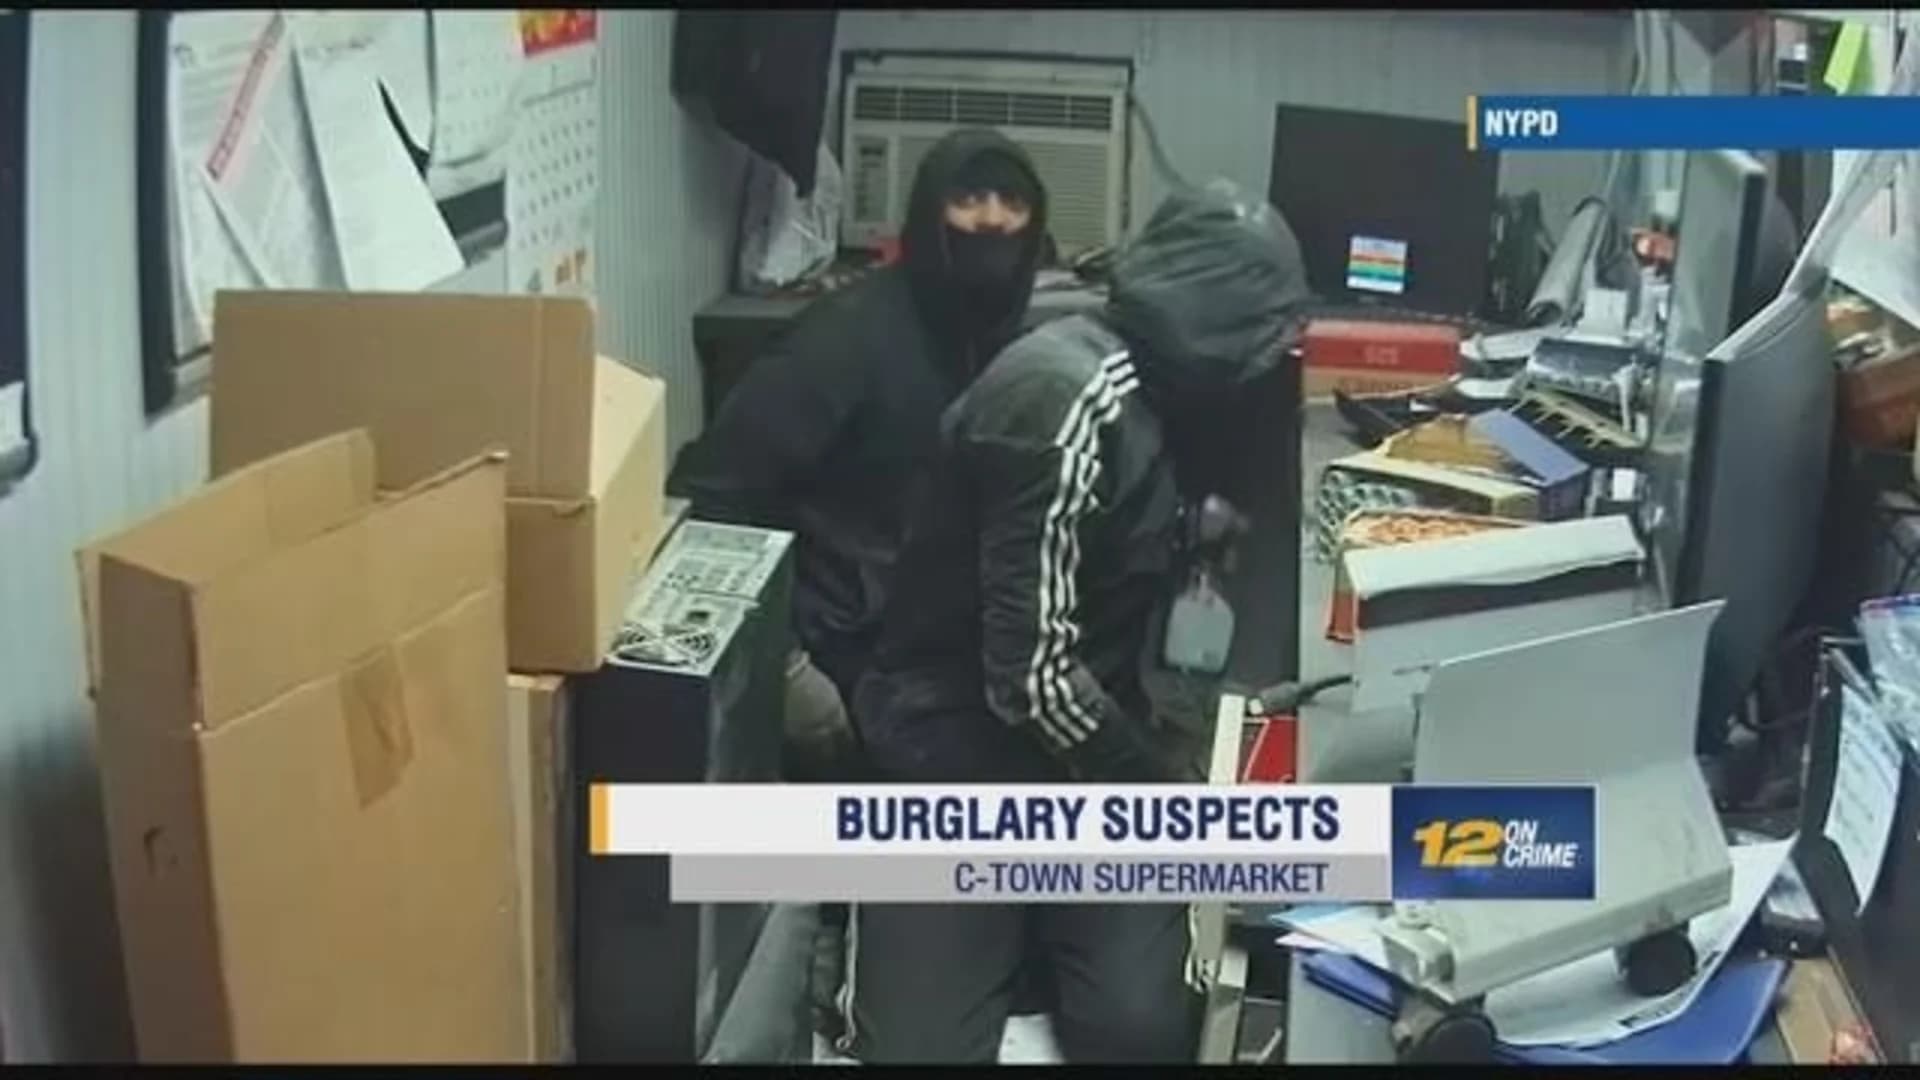 2 accused of $10K burglary at Marble Hill C-Town